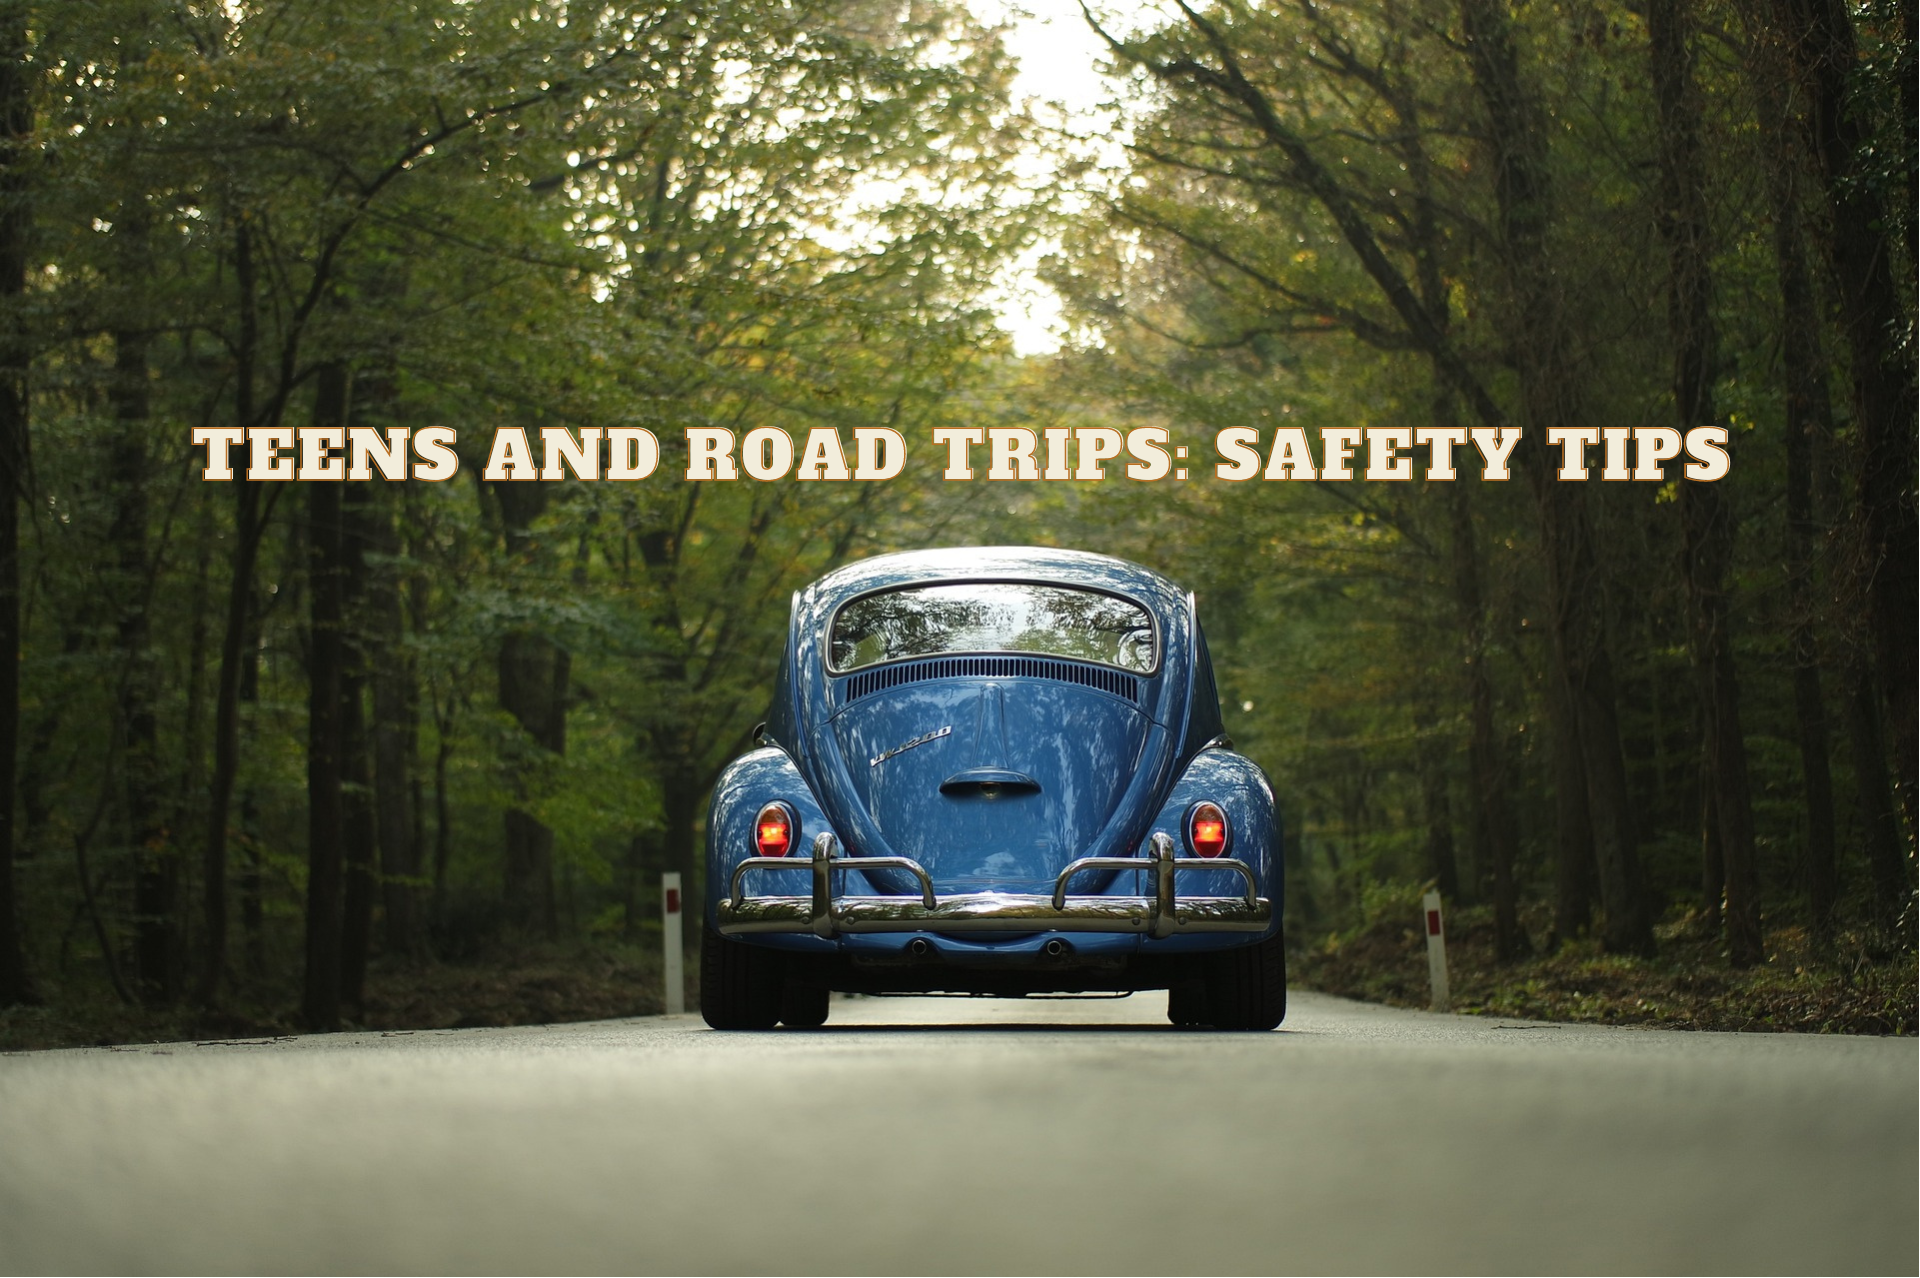 Teens and Road Trips Safety Tips